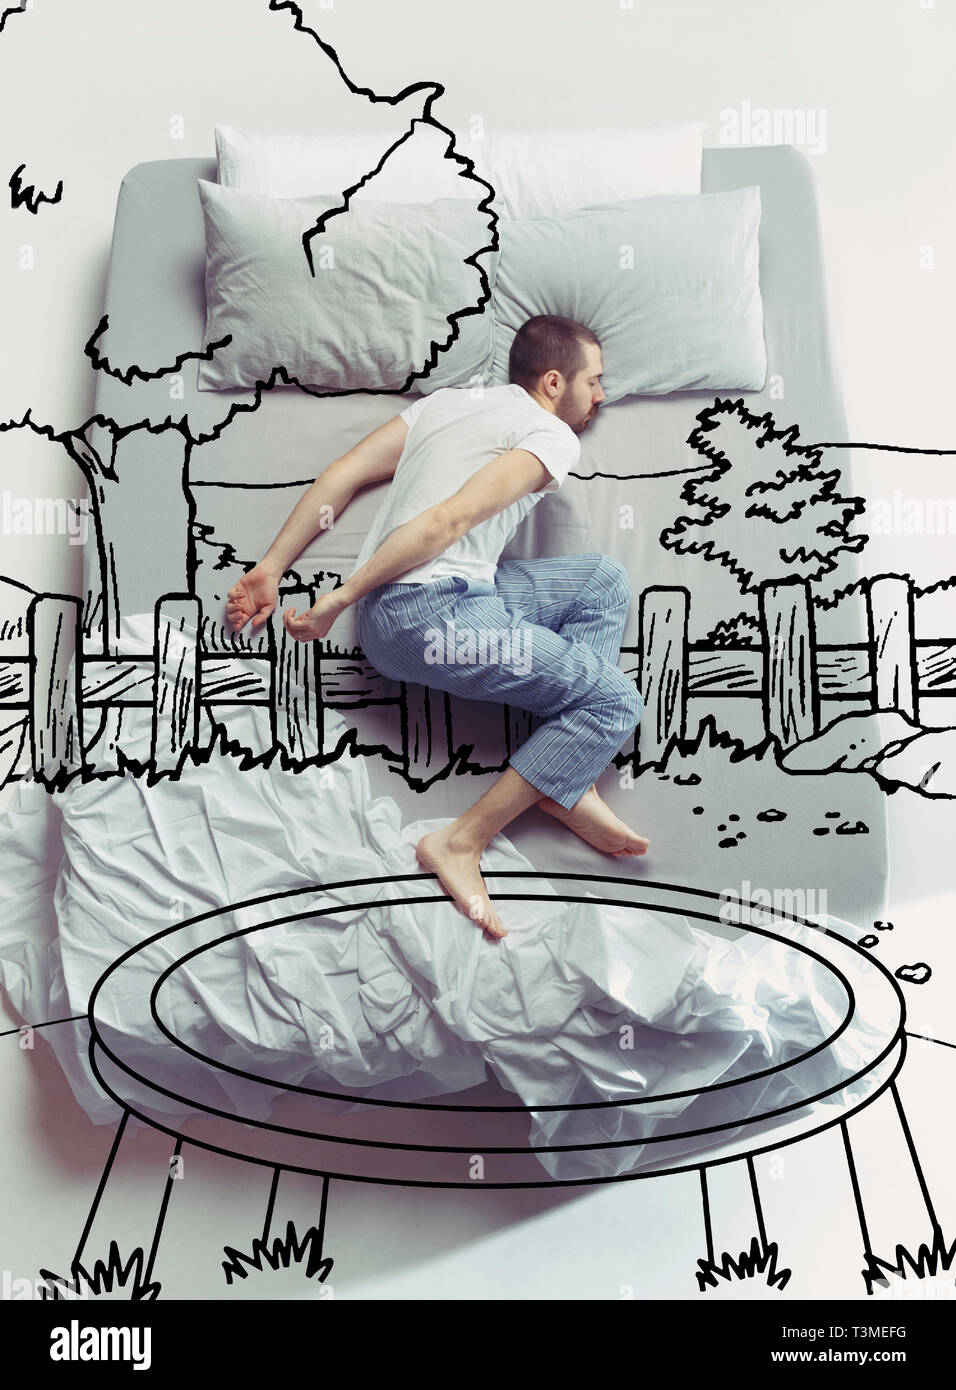 Trampoline jumping. Top view photo of young man sleeping in a big white bed at home. Dreams concept. Painted dream about summertime, nature, activity, sport, trees, weekend, resort, holidays Stock Photo -